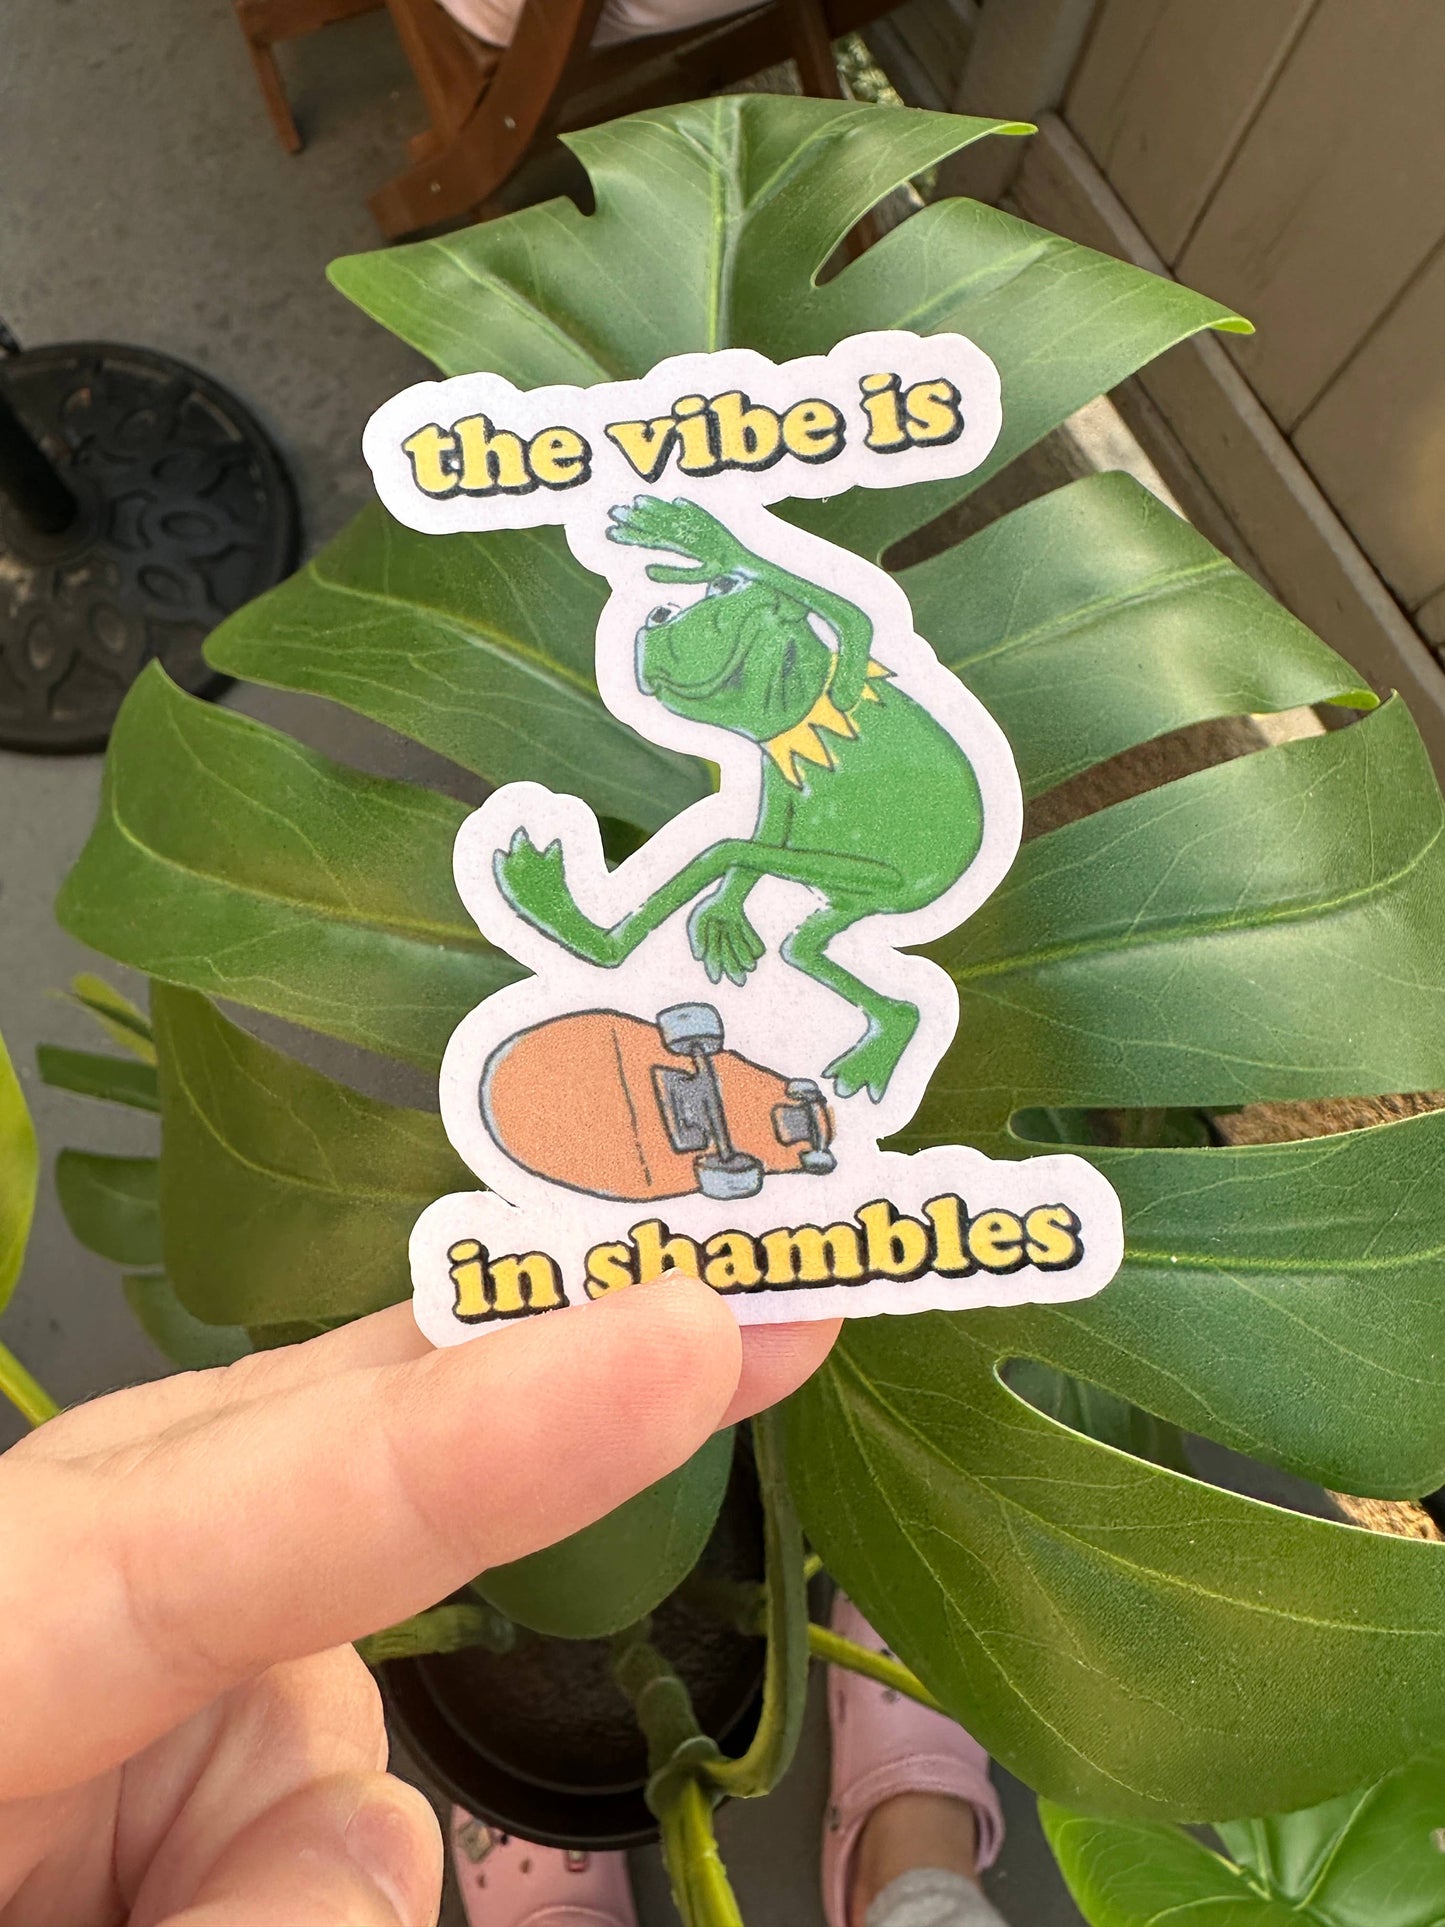 The Vibe Is In Shambles Sticker